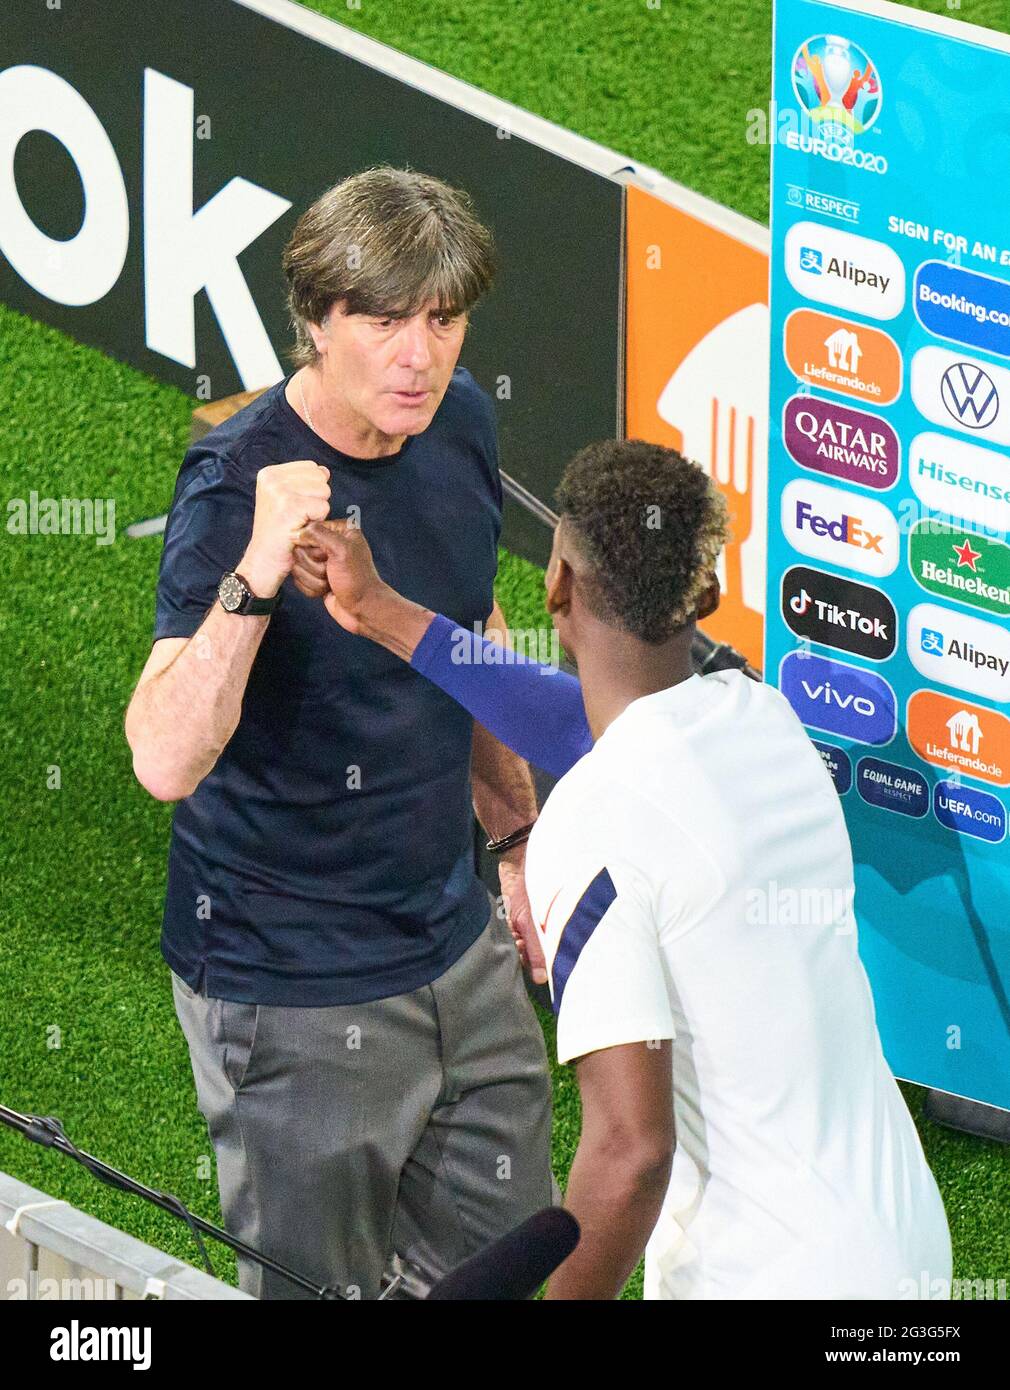 DFB headcoach Joachim Jogi LOEW, LÖW , Bundestrainer, Nationaltrainer, Tv interview ARD, Paul POGBA, FRA 6  in the Group F match FRANCE - GERMANY  1-0 at the football UEFA European Championships 2020 in Season 2020/2021 on June 15, 2021  in Munich, Germany. © Peter Schatz / Alamy Live News Stock Photo